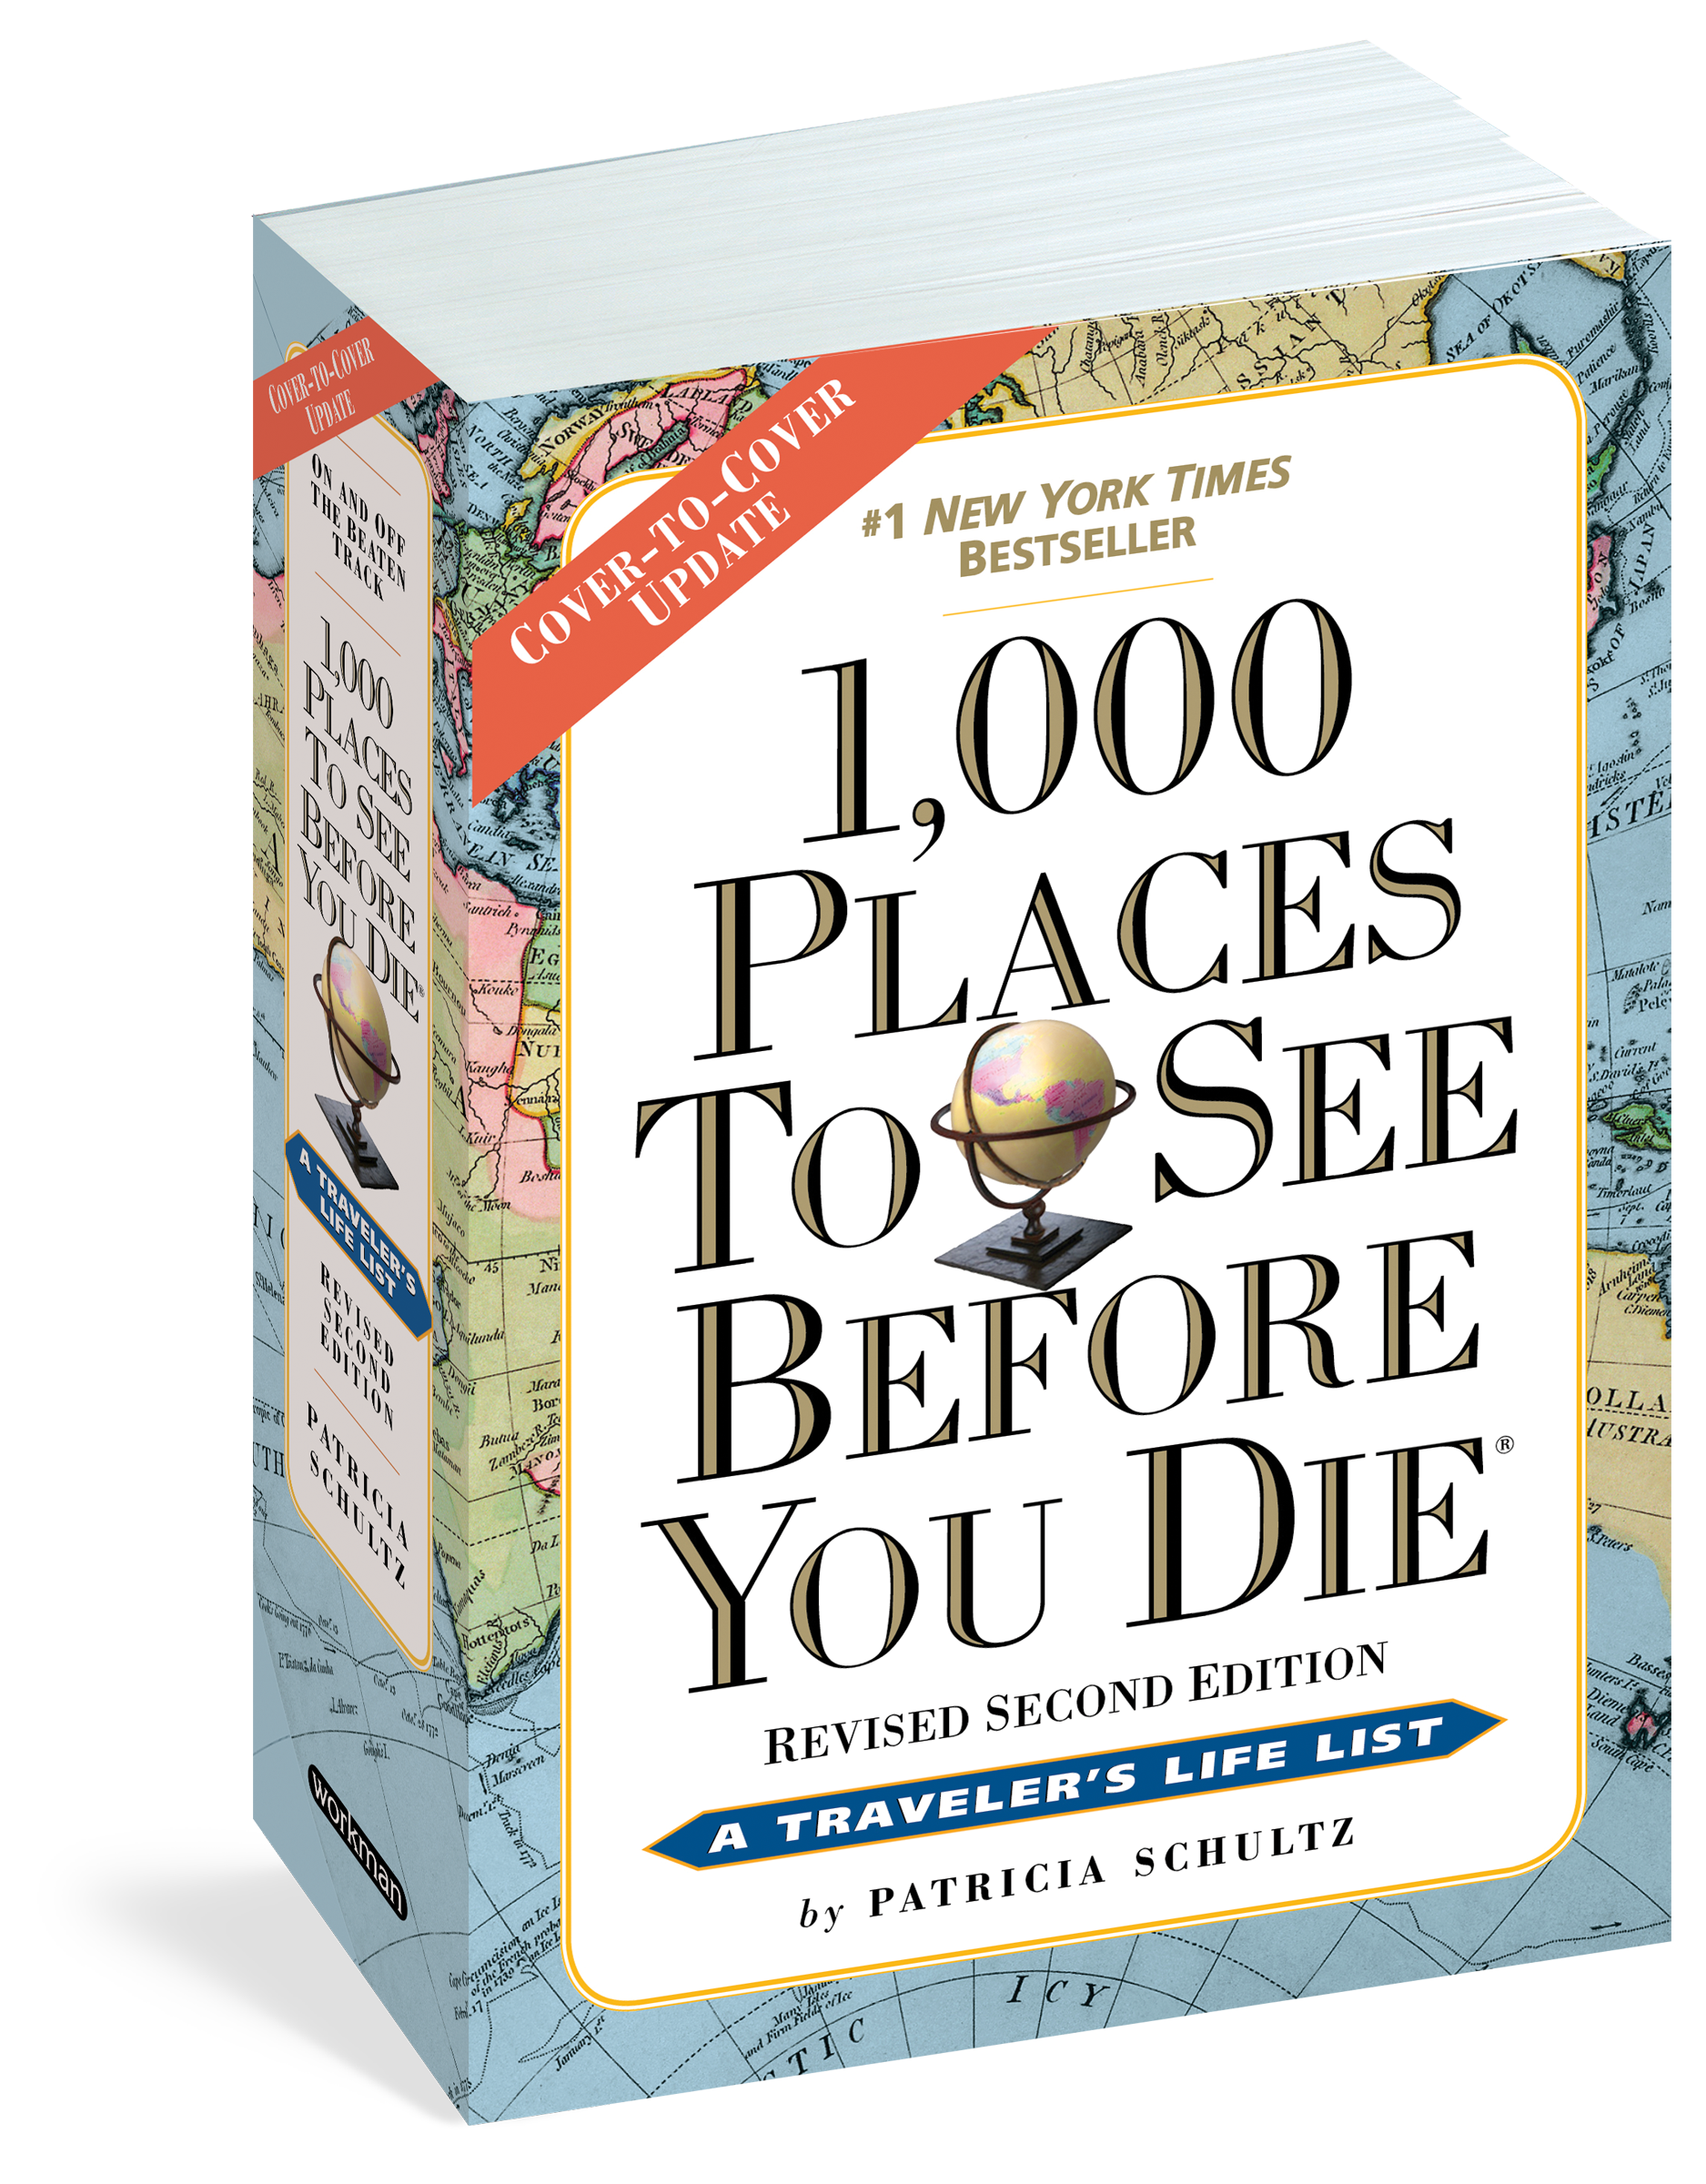 1,000 places to see before you die